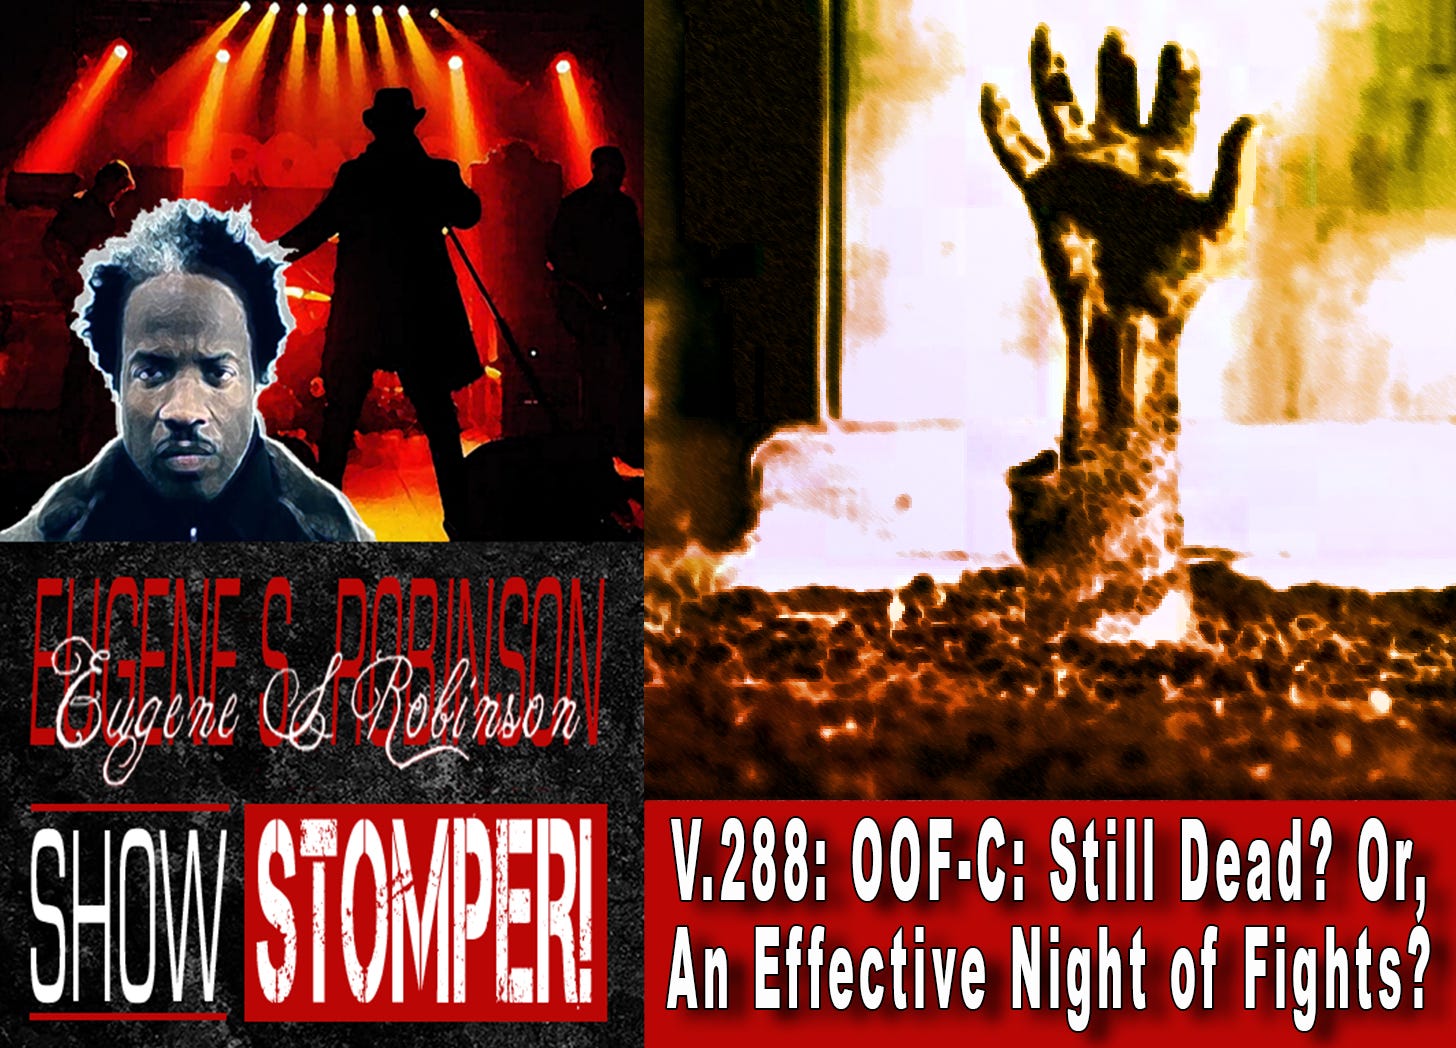 V.288: OOF-C: Still Dead? Or, An Effective Night of Fights? On The Eugene S. Robinson Show Stomper!